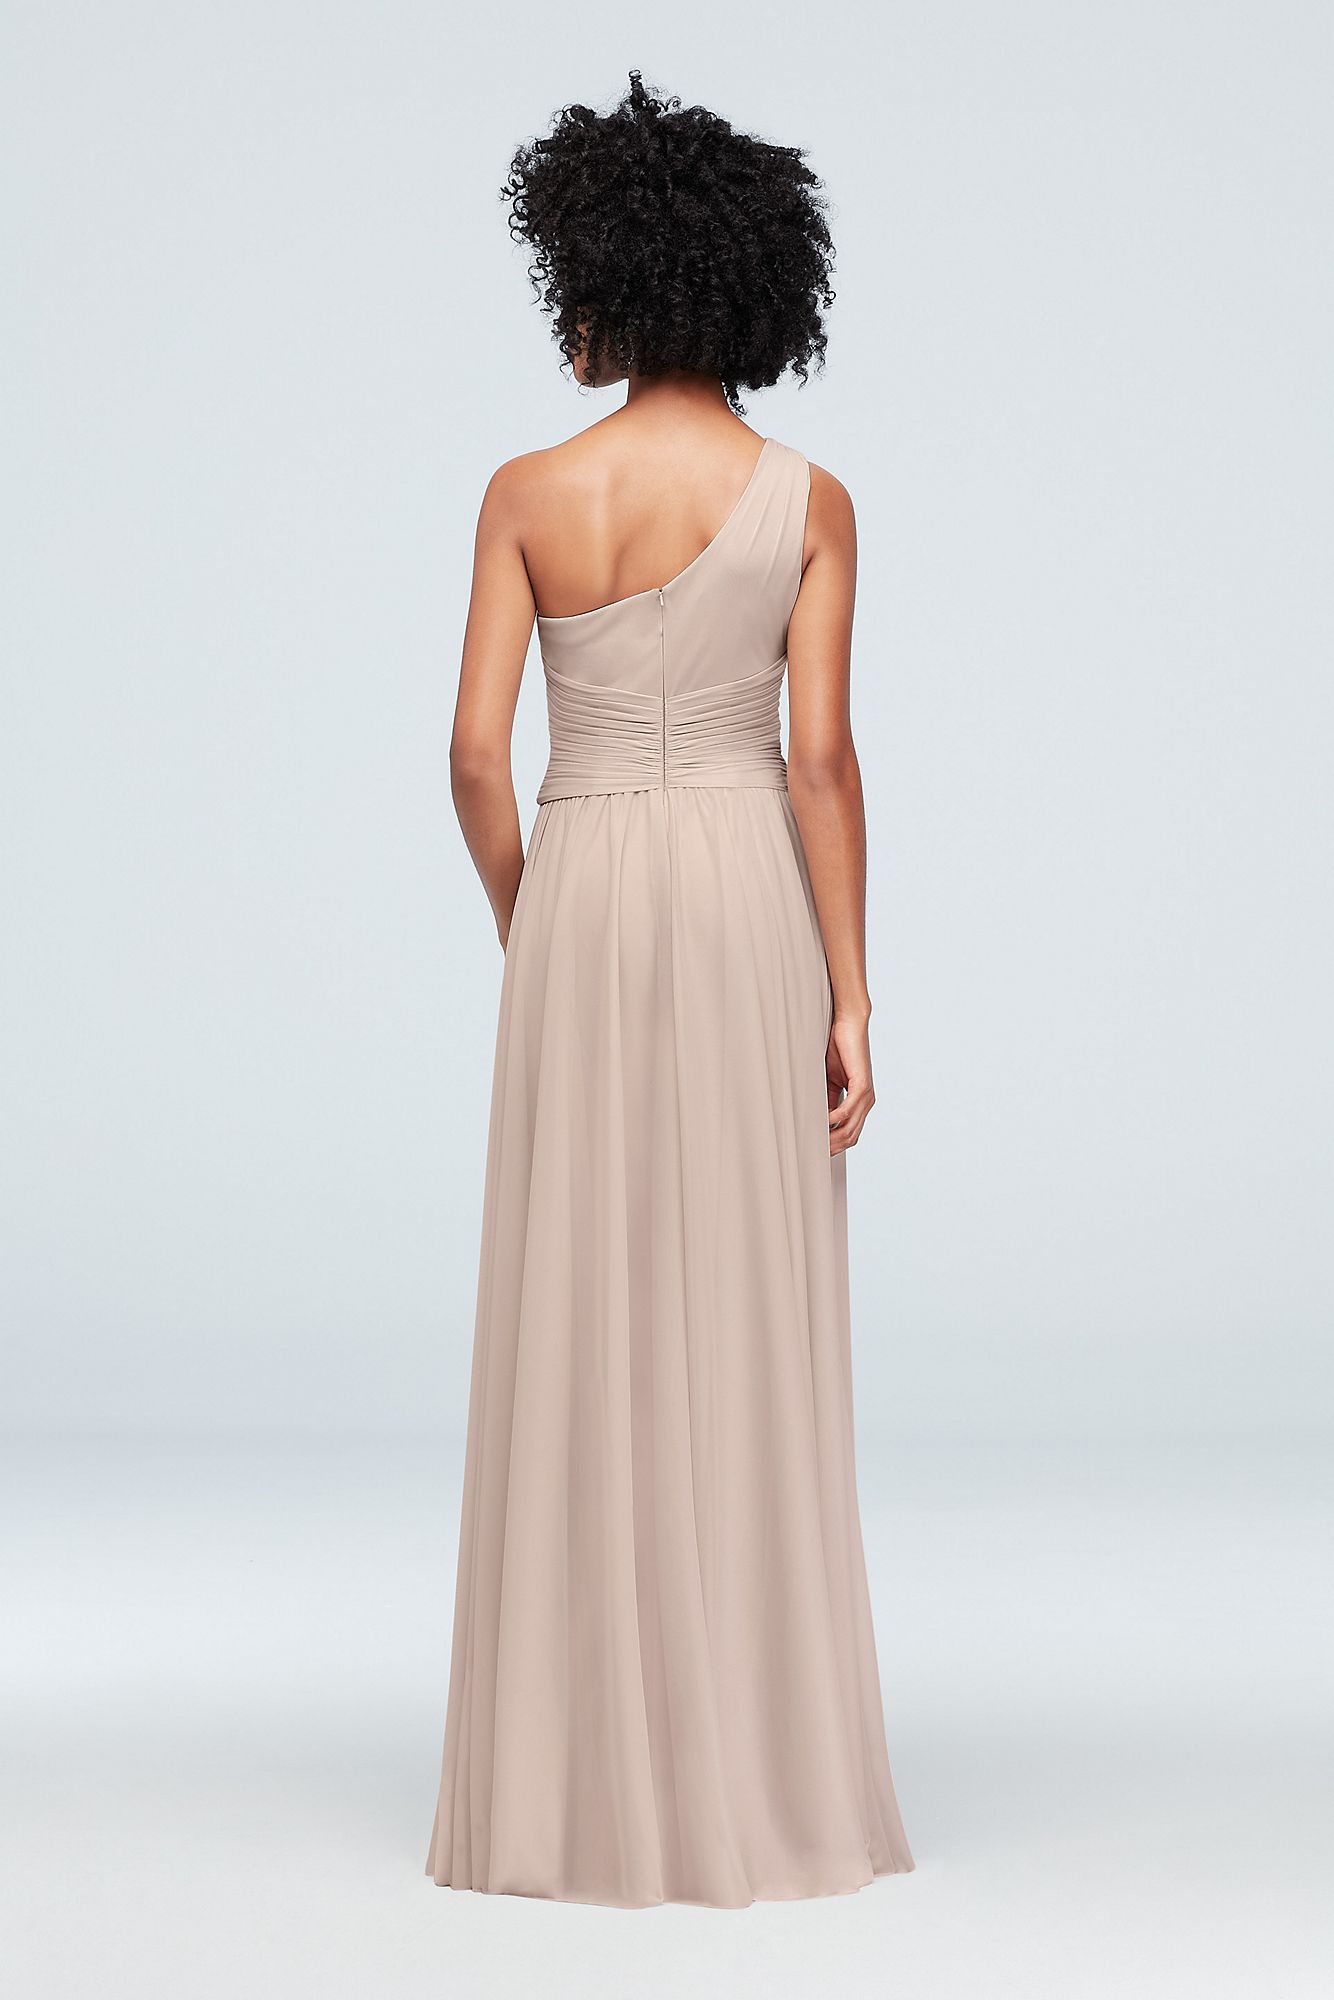 One-Shoulder Mesh Bridesmaid Dress with Full Skirt   F19932